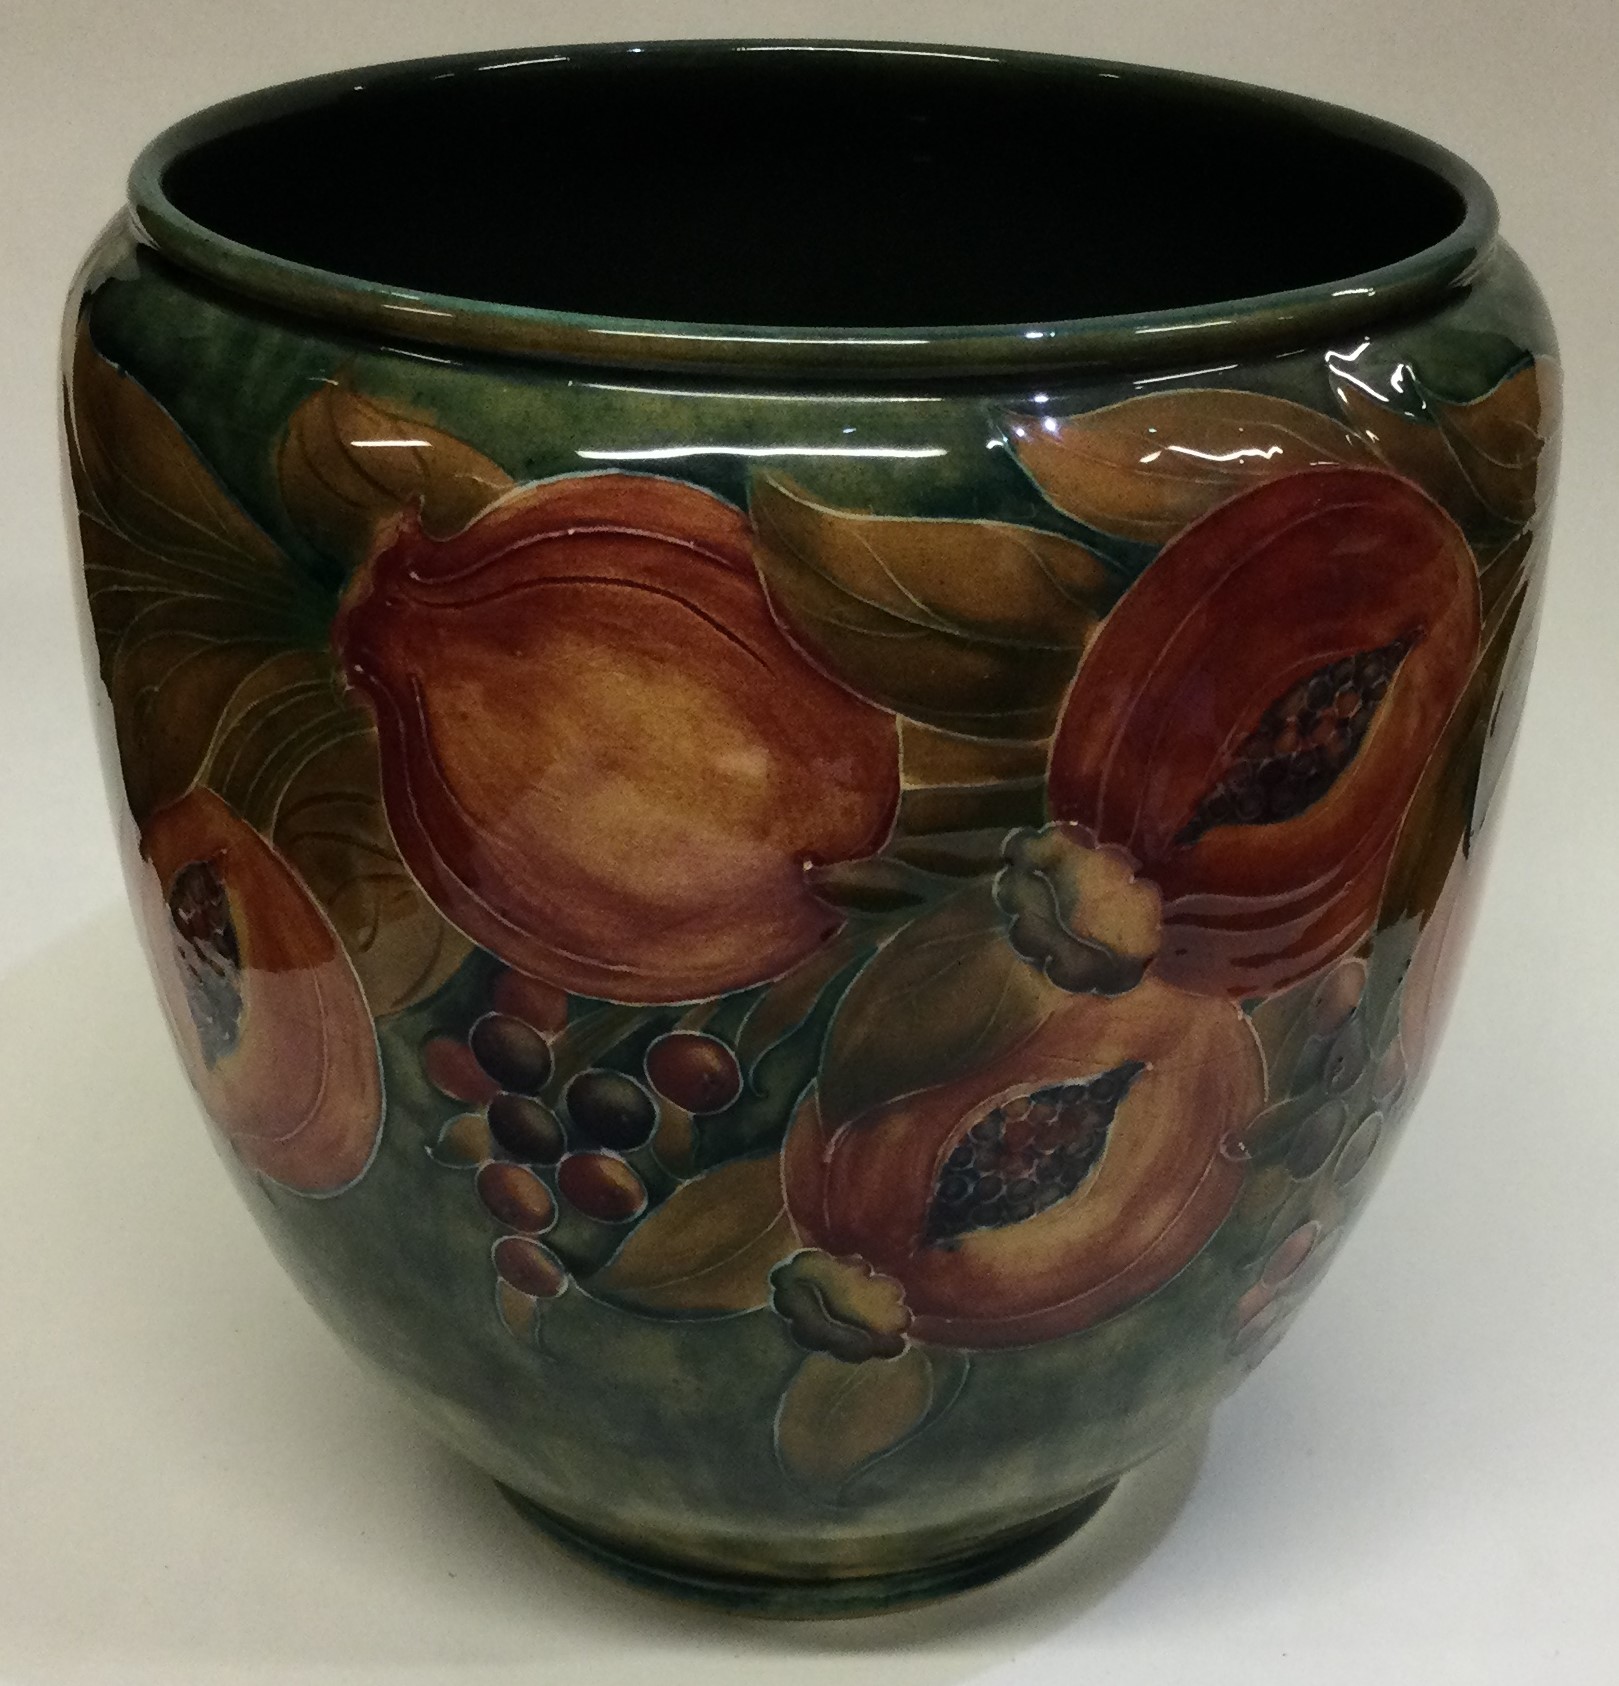 WILLIAM MOORCROFT: An early "Pomegranate" bowl on mottled green ground. - Image 6 of 8